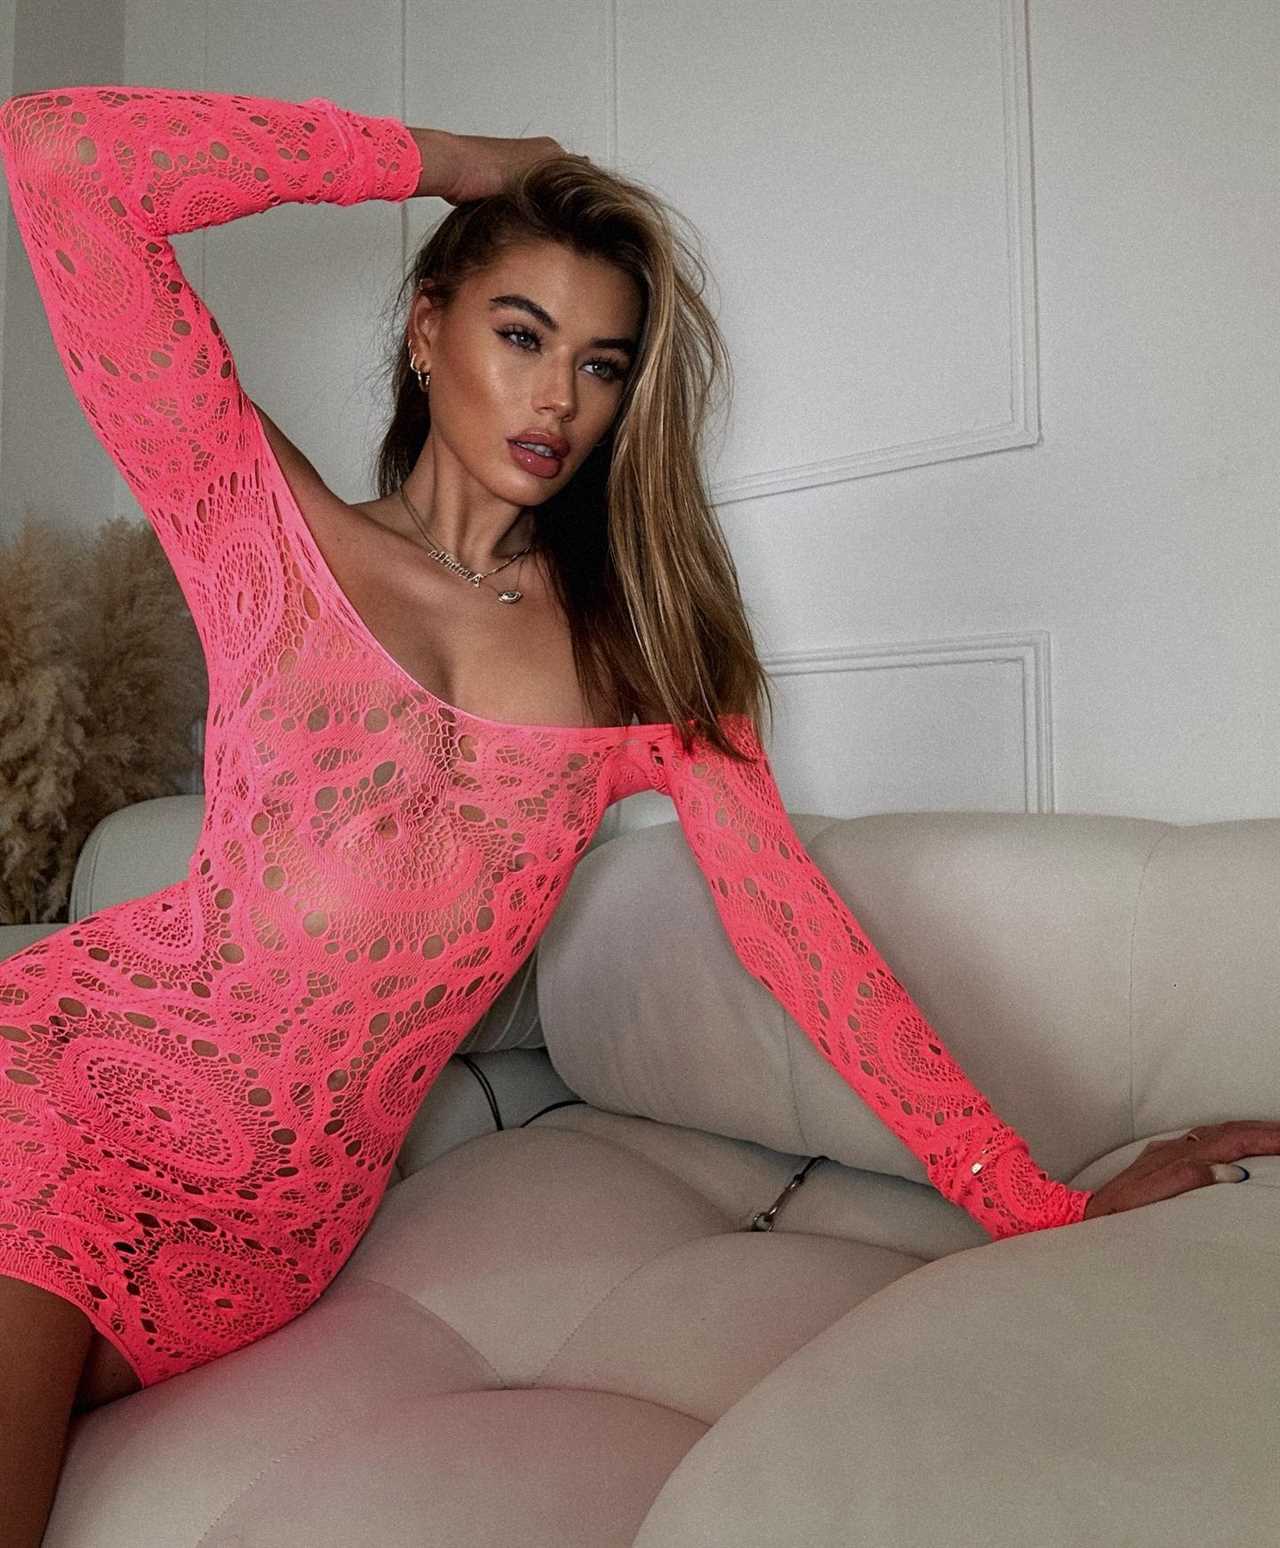 Love Island’s Arabella Chi ditches her underwear to pose in totally see-through pink dress